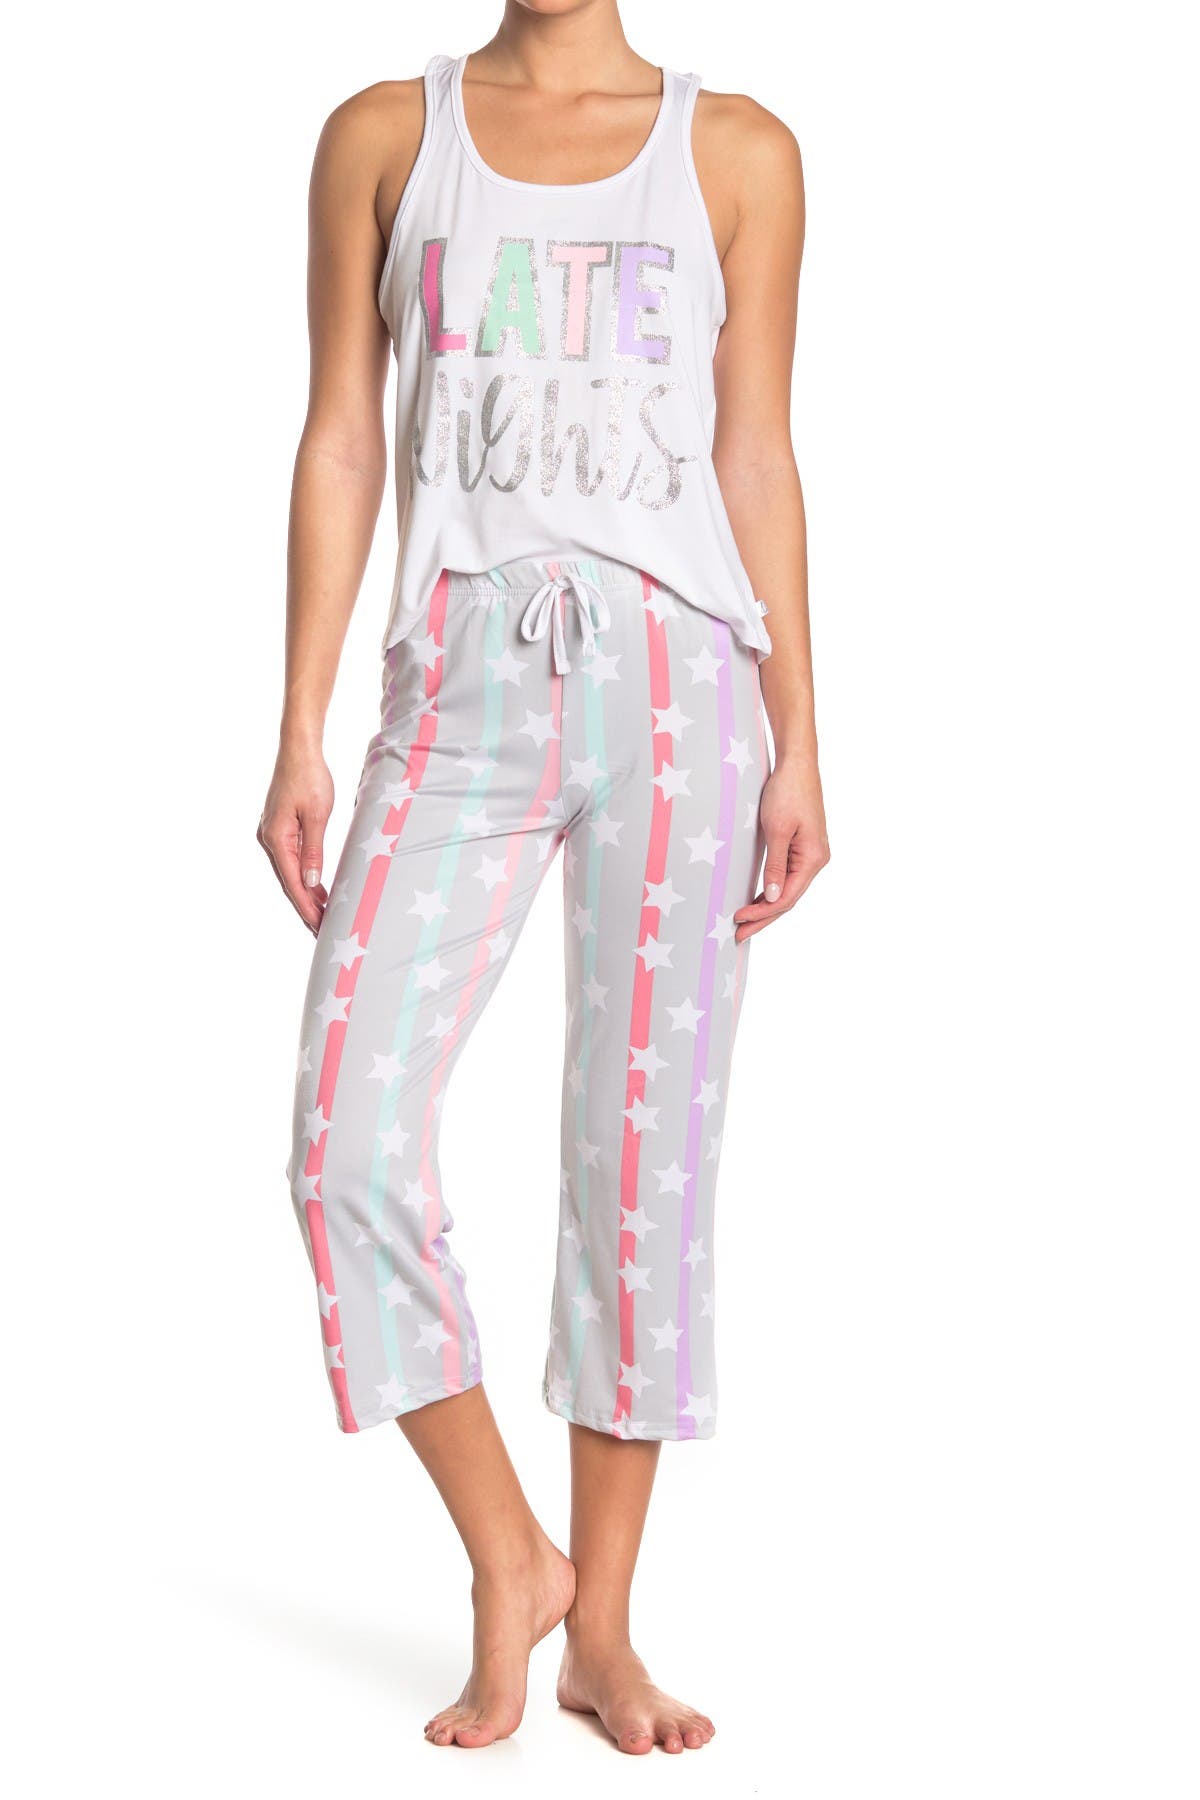 French Affair Late Nights Tank Top & Pants Pajama 2-piece Set In Grey